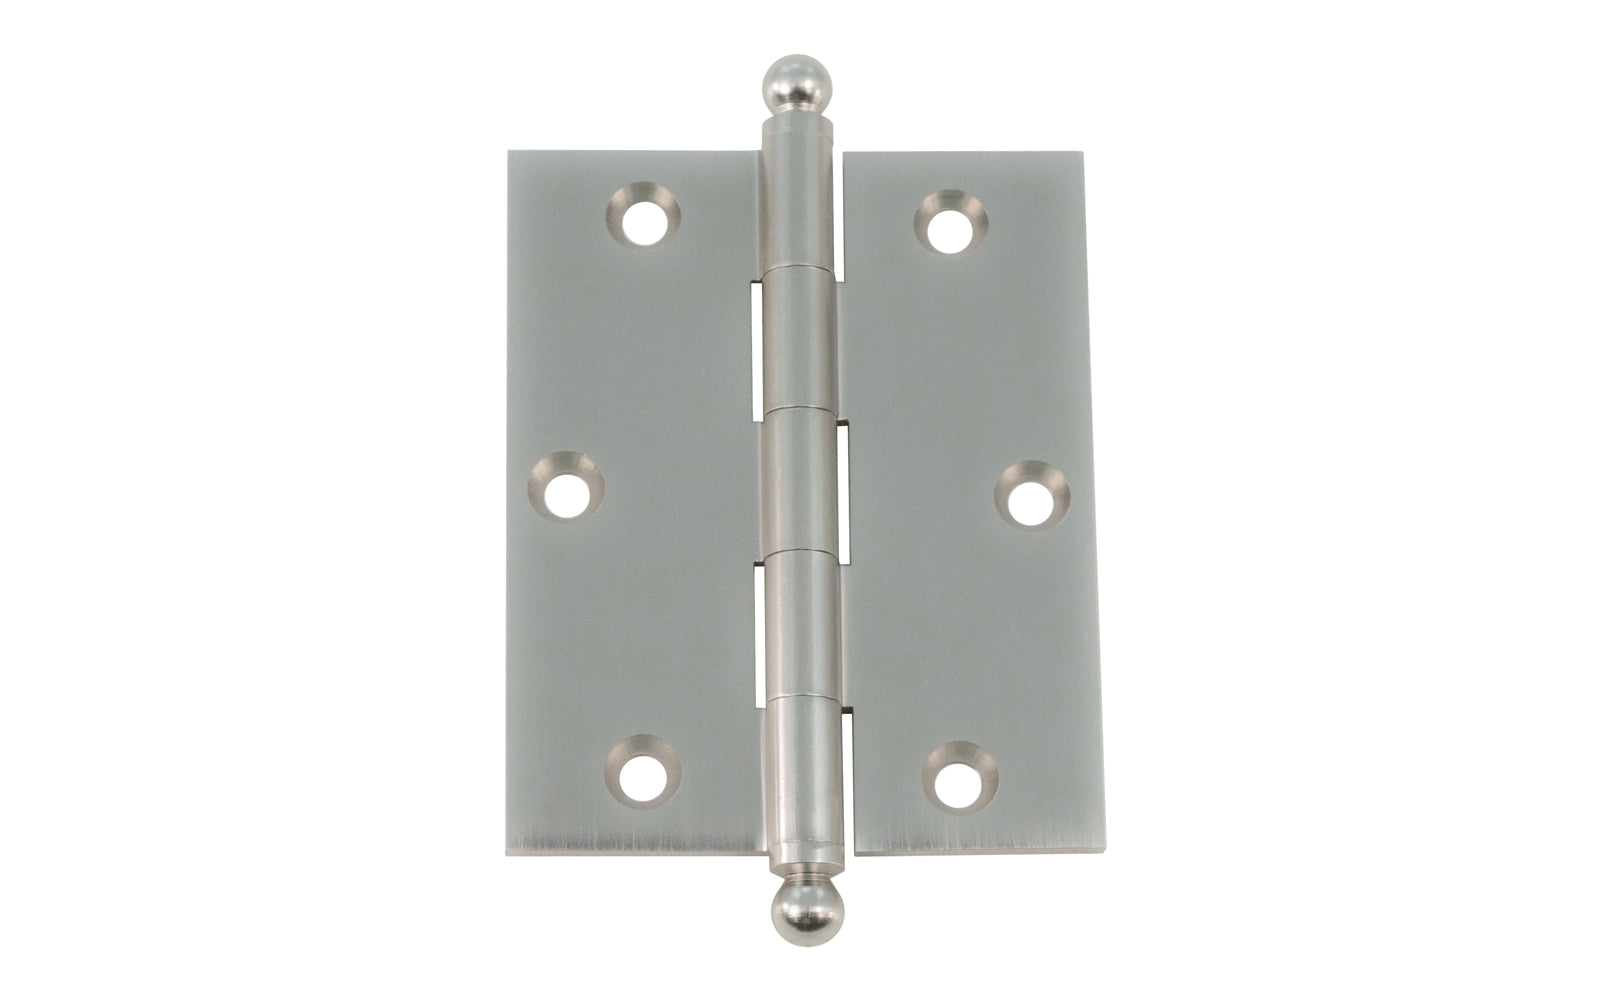 Classic Solid Brass Ball-Tip Cabinet Hinge ~ 2-1/2" x 2". Full mortise extruded hinges. 3/32" heavy duty leaf thickness gauge. Non-removable fixed hinge pin with ball tips. High quality thick cabinet hinge with ball tips. Brushed Nickel finish.